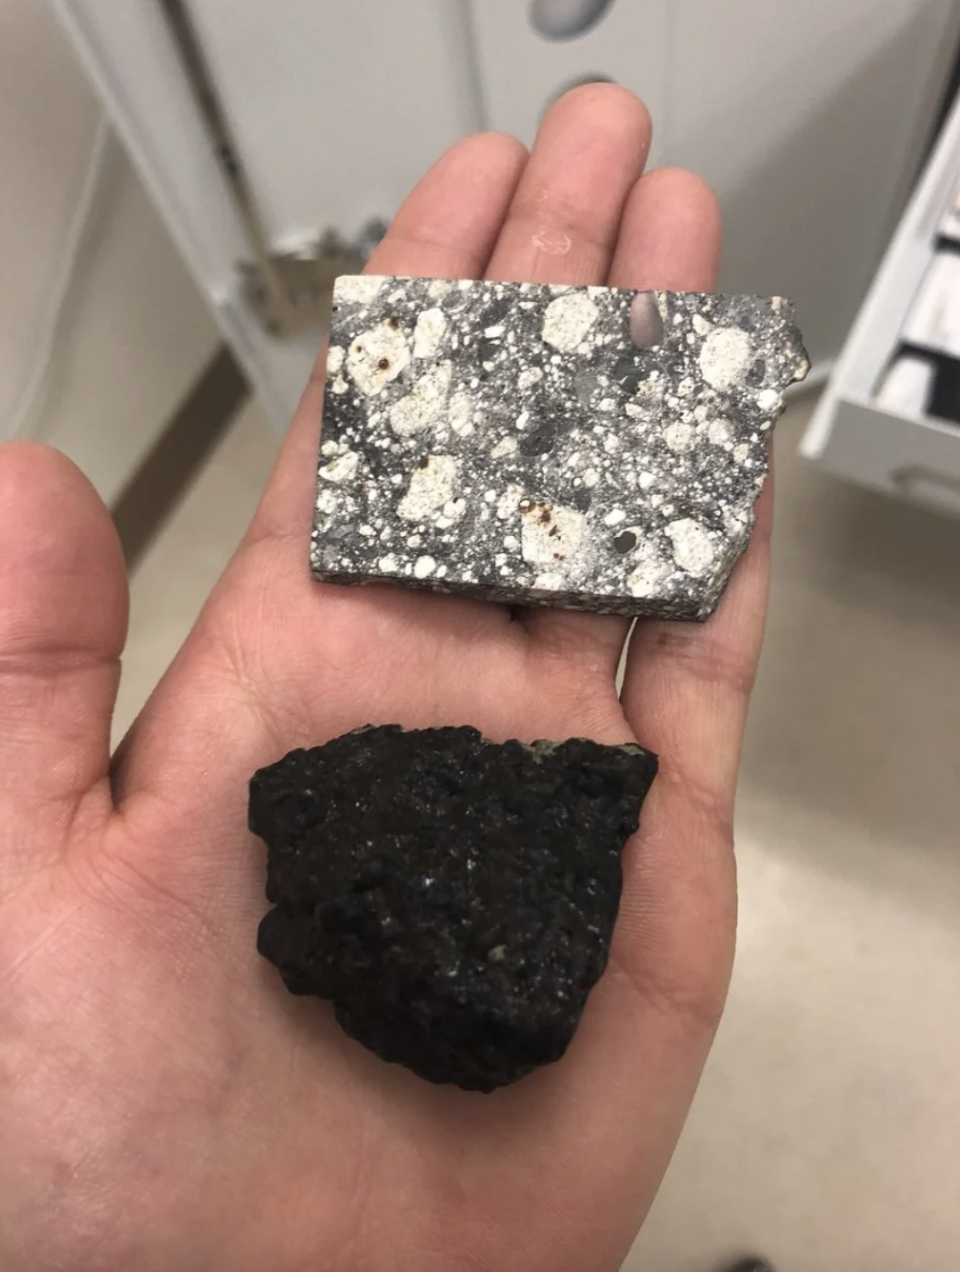 A person's hand holding a speckled square mineral sample above a rough, irregular-shaped black sample